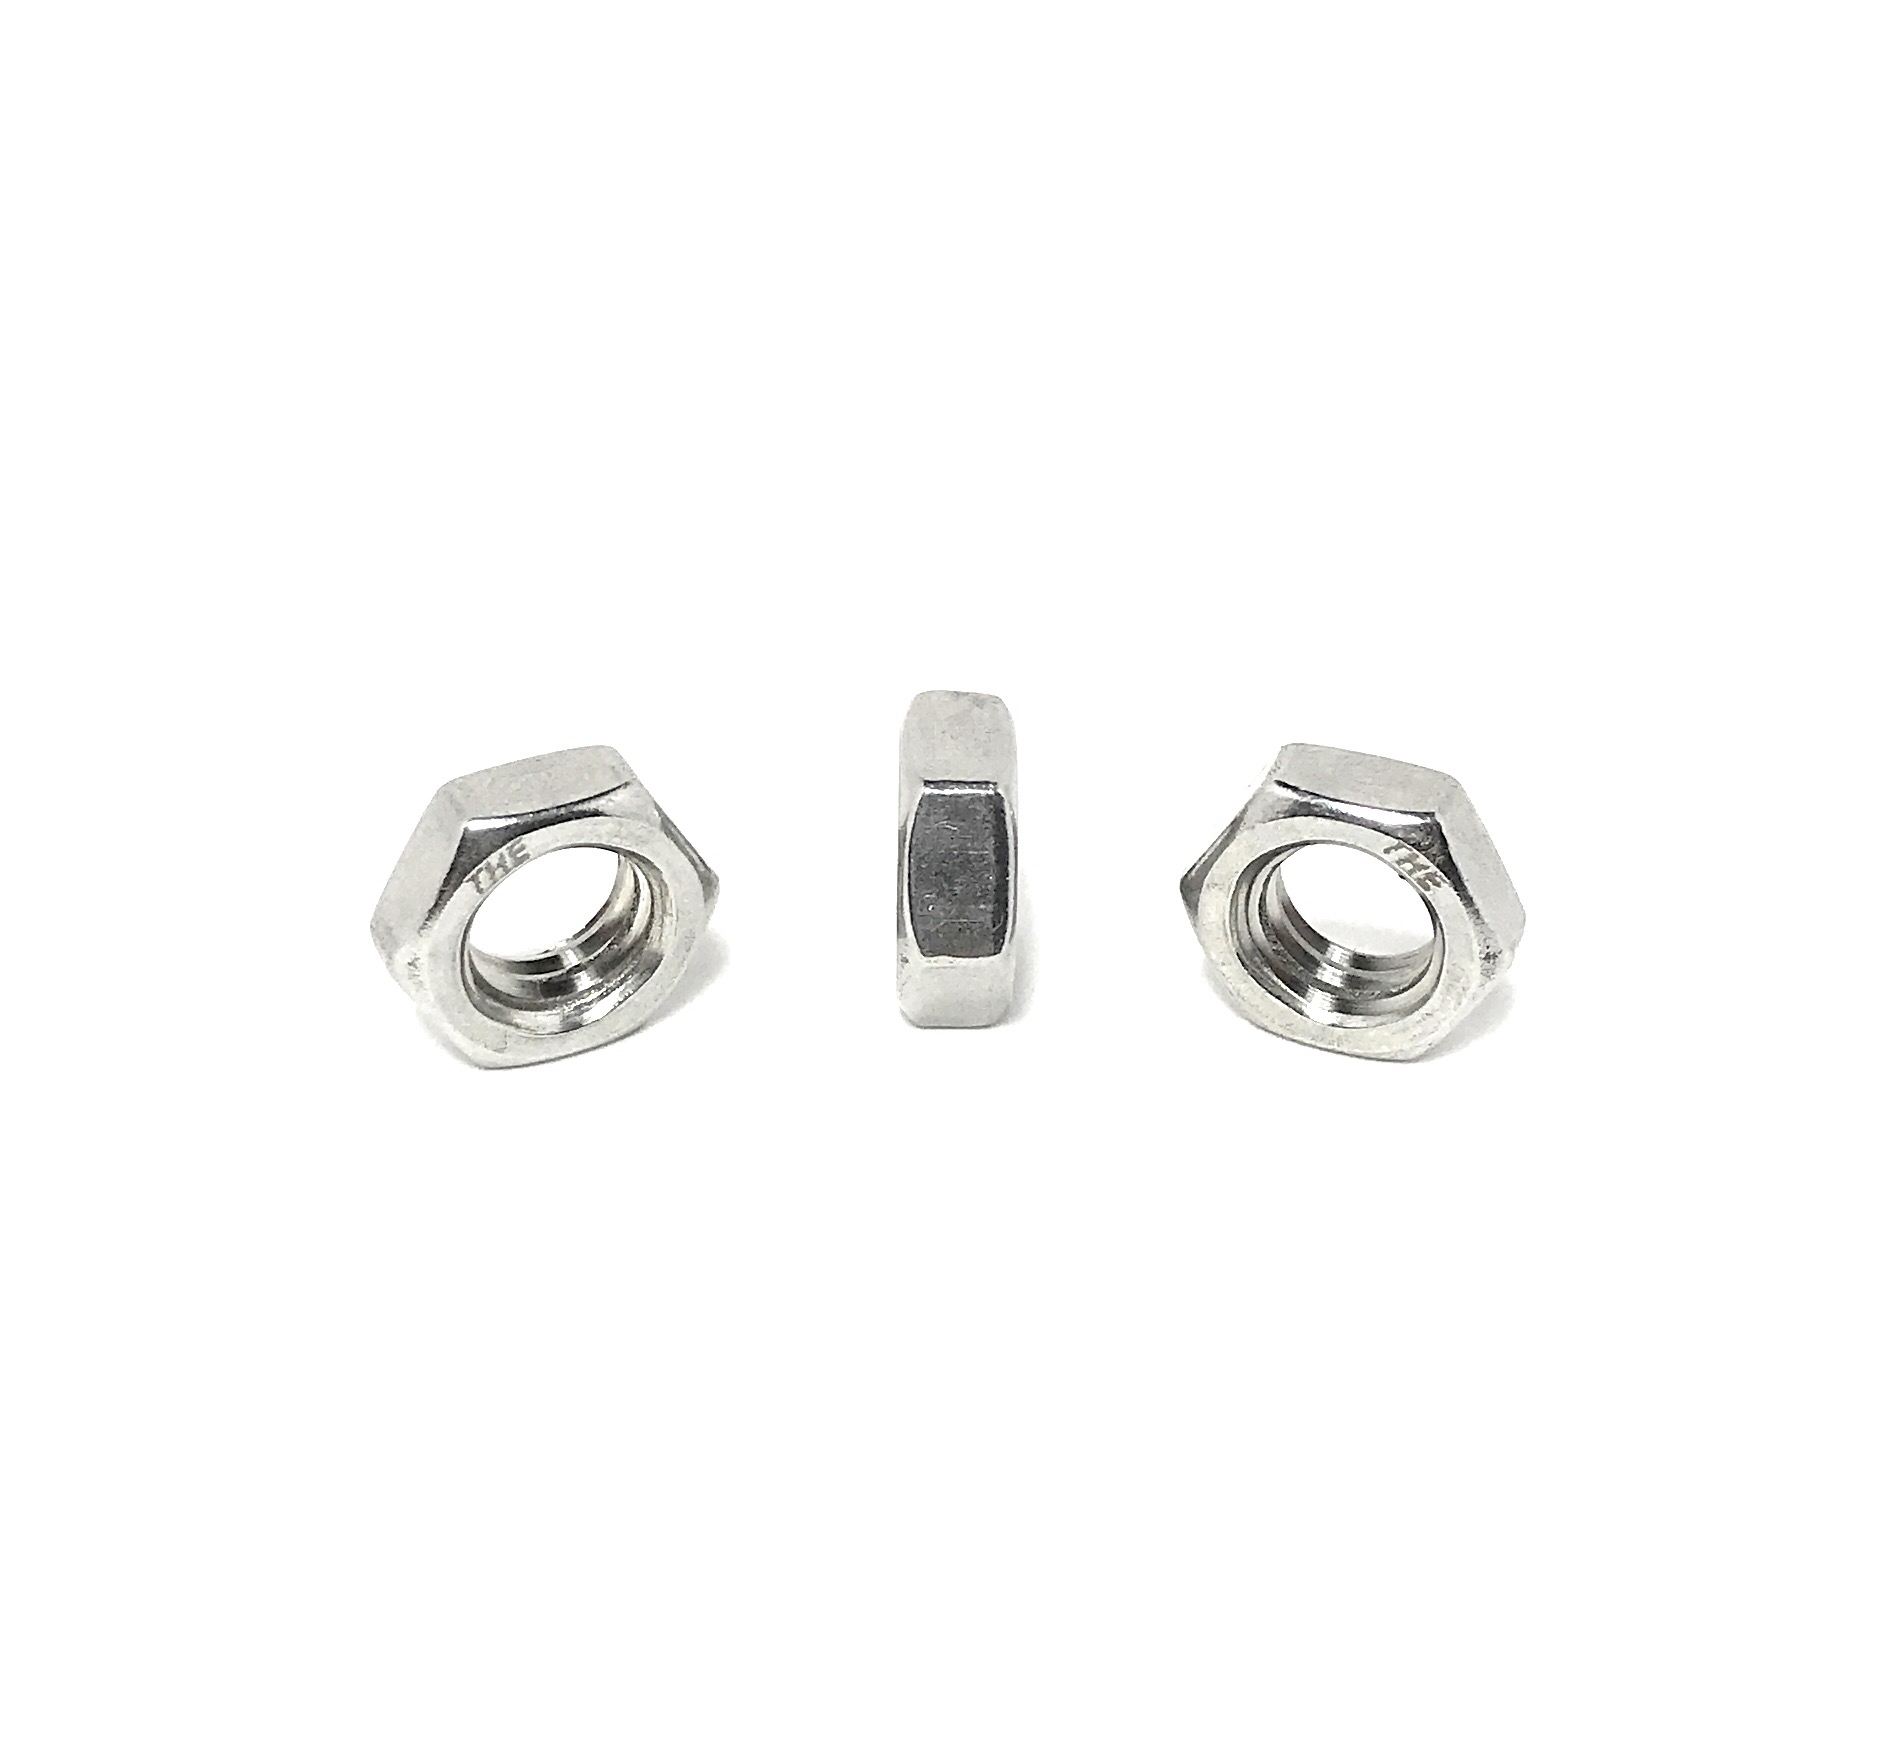 Hex Jam Thin Nut Stainless Steel UNC 7/16-14 Qty 25 